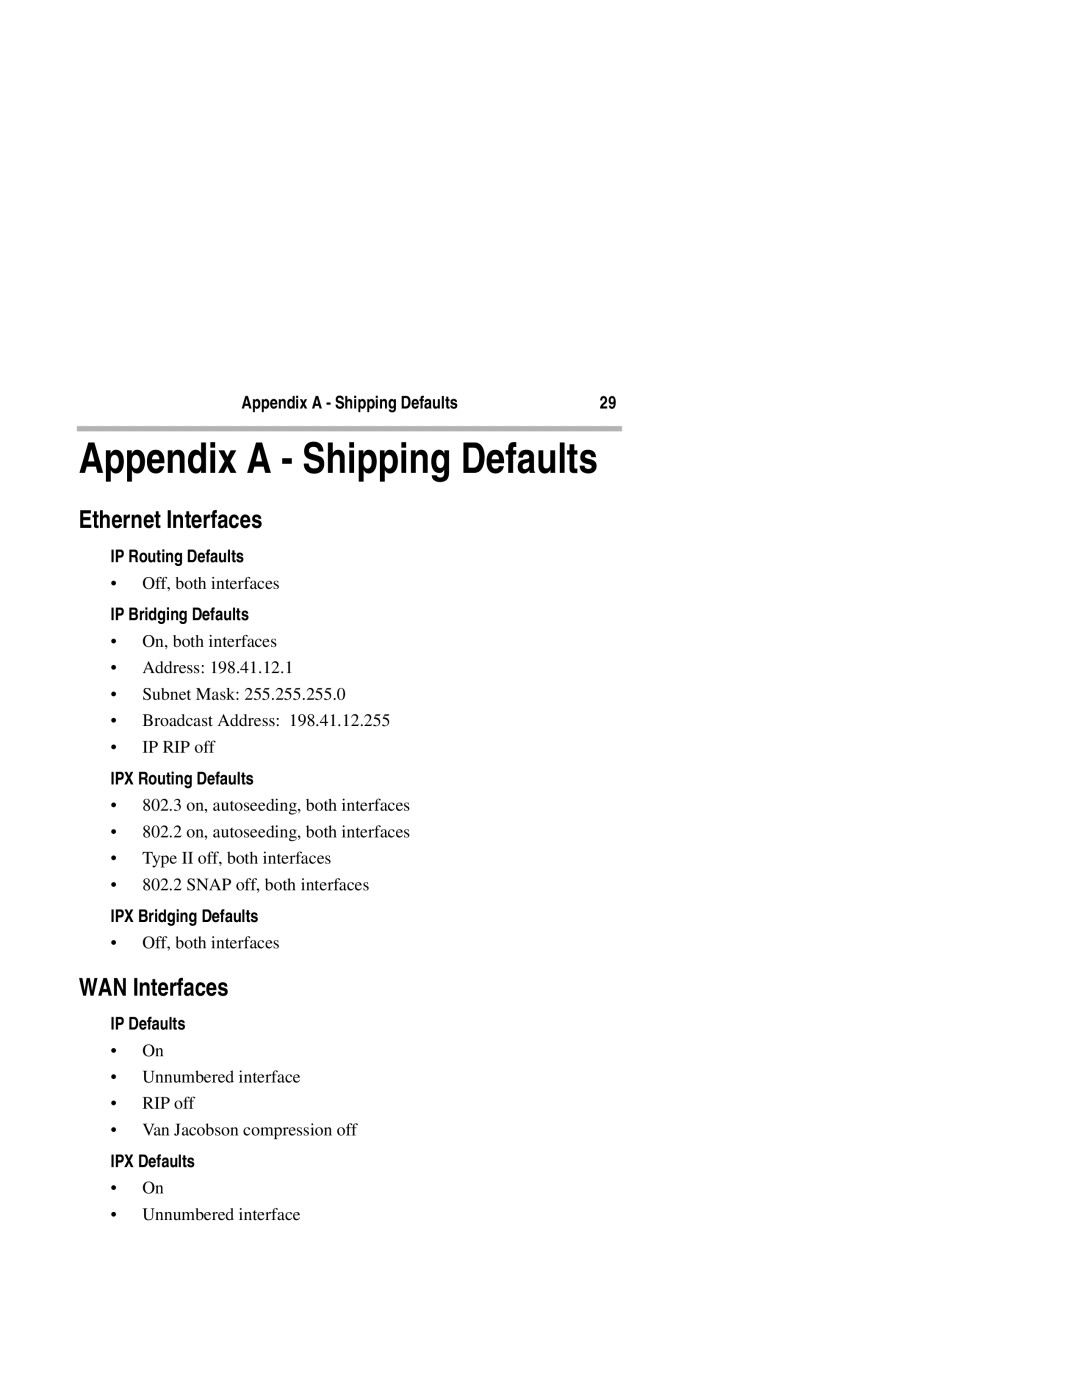 Compatible Systems 1220I manual Appendix a Shipping Defaults, Ethernet Interfaces, WAN Interfaces 